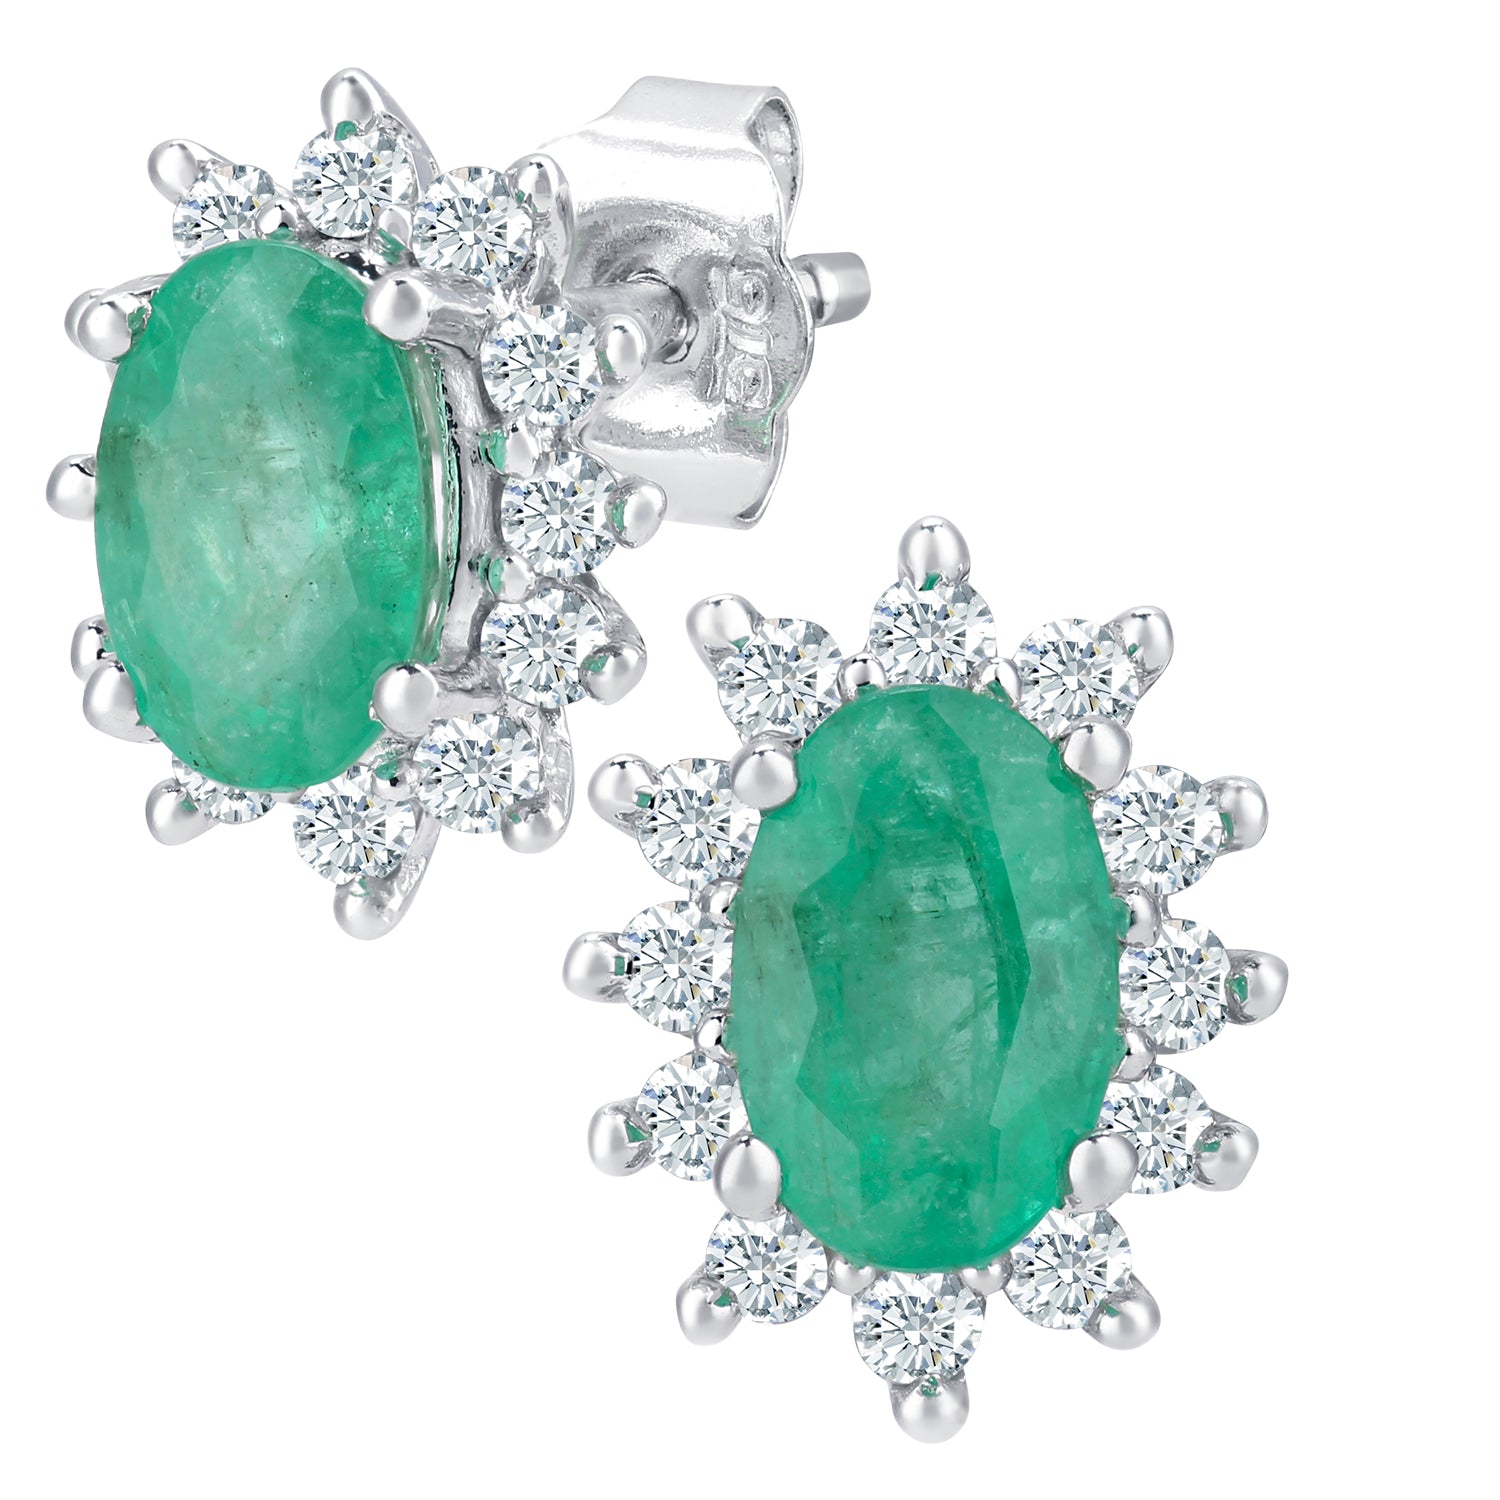 Simplicity White Gold Oval Shaped Emerald and Diamond Cluster Stud